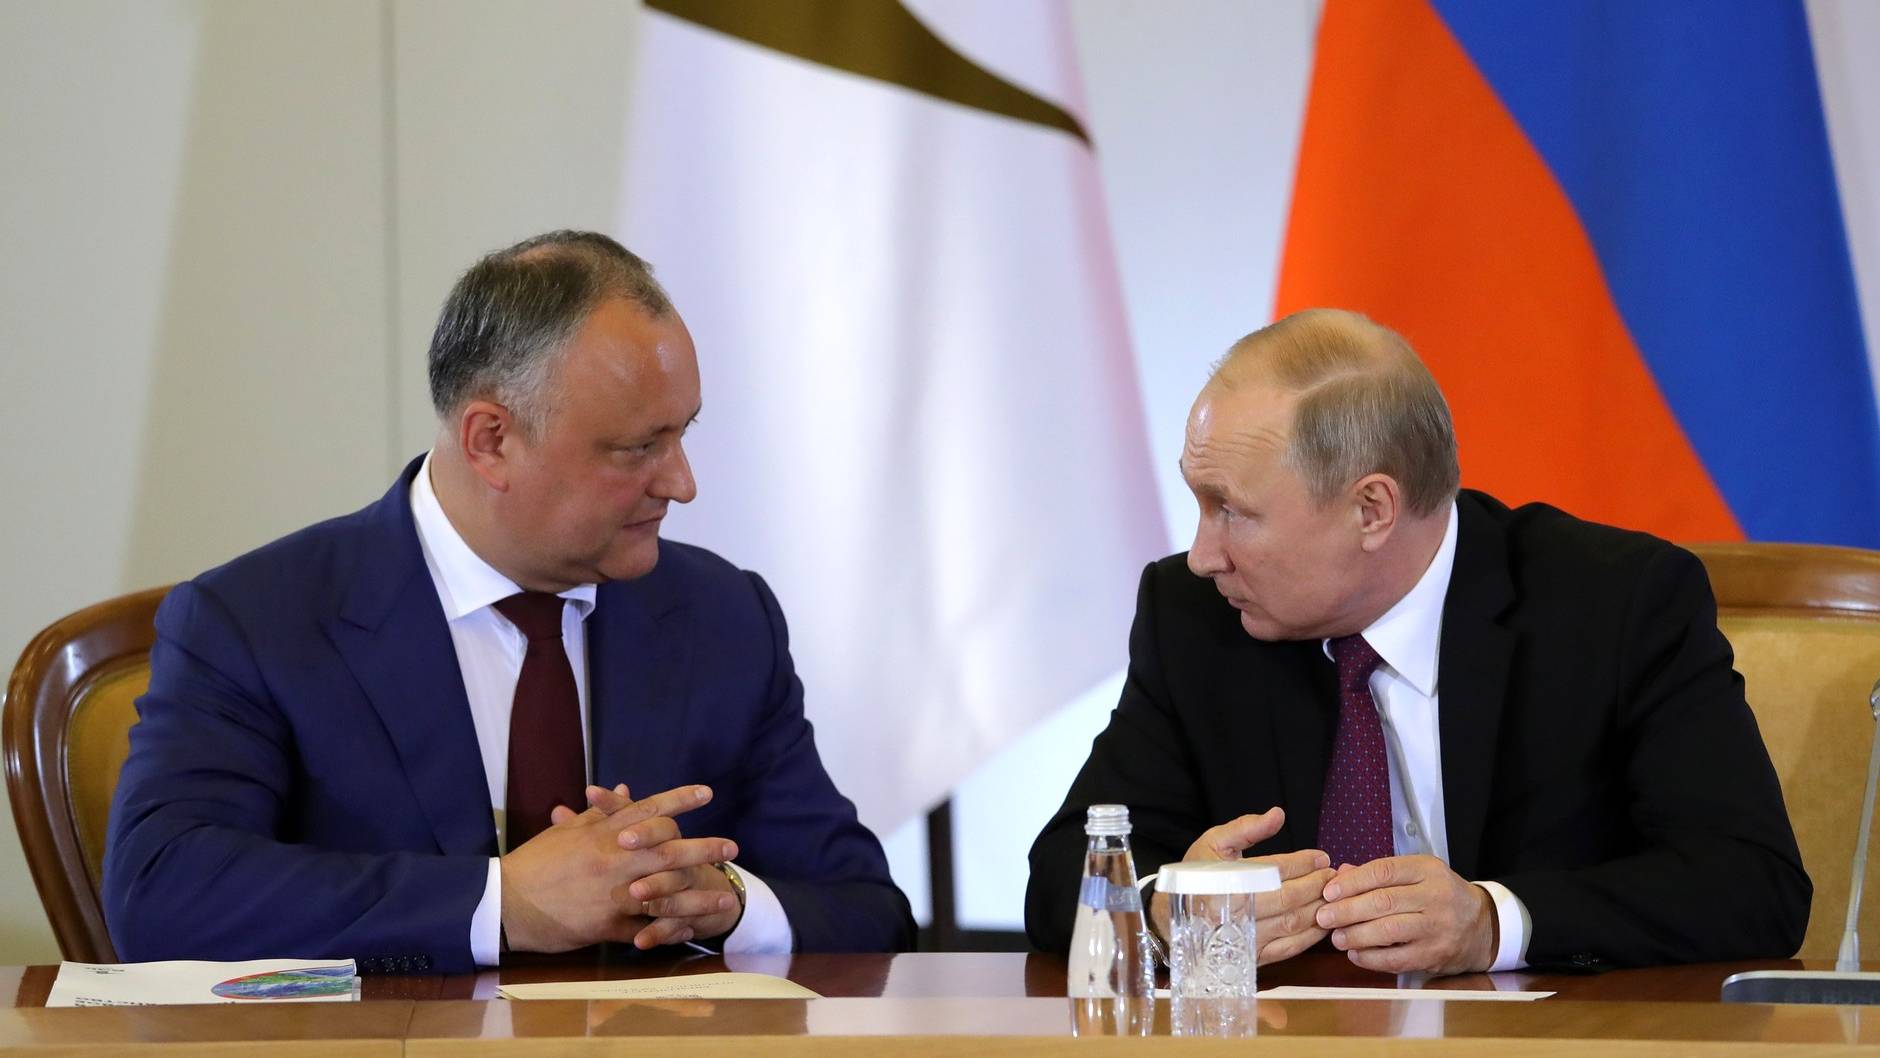 Former Moldovan leader Igor Dodon was seen as an ally to his Russian counterpart Vladimir Putin. /President of the Russian Federation/WikiCommons